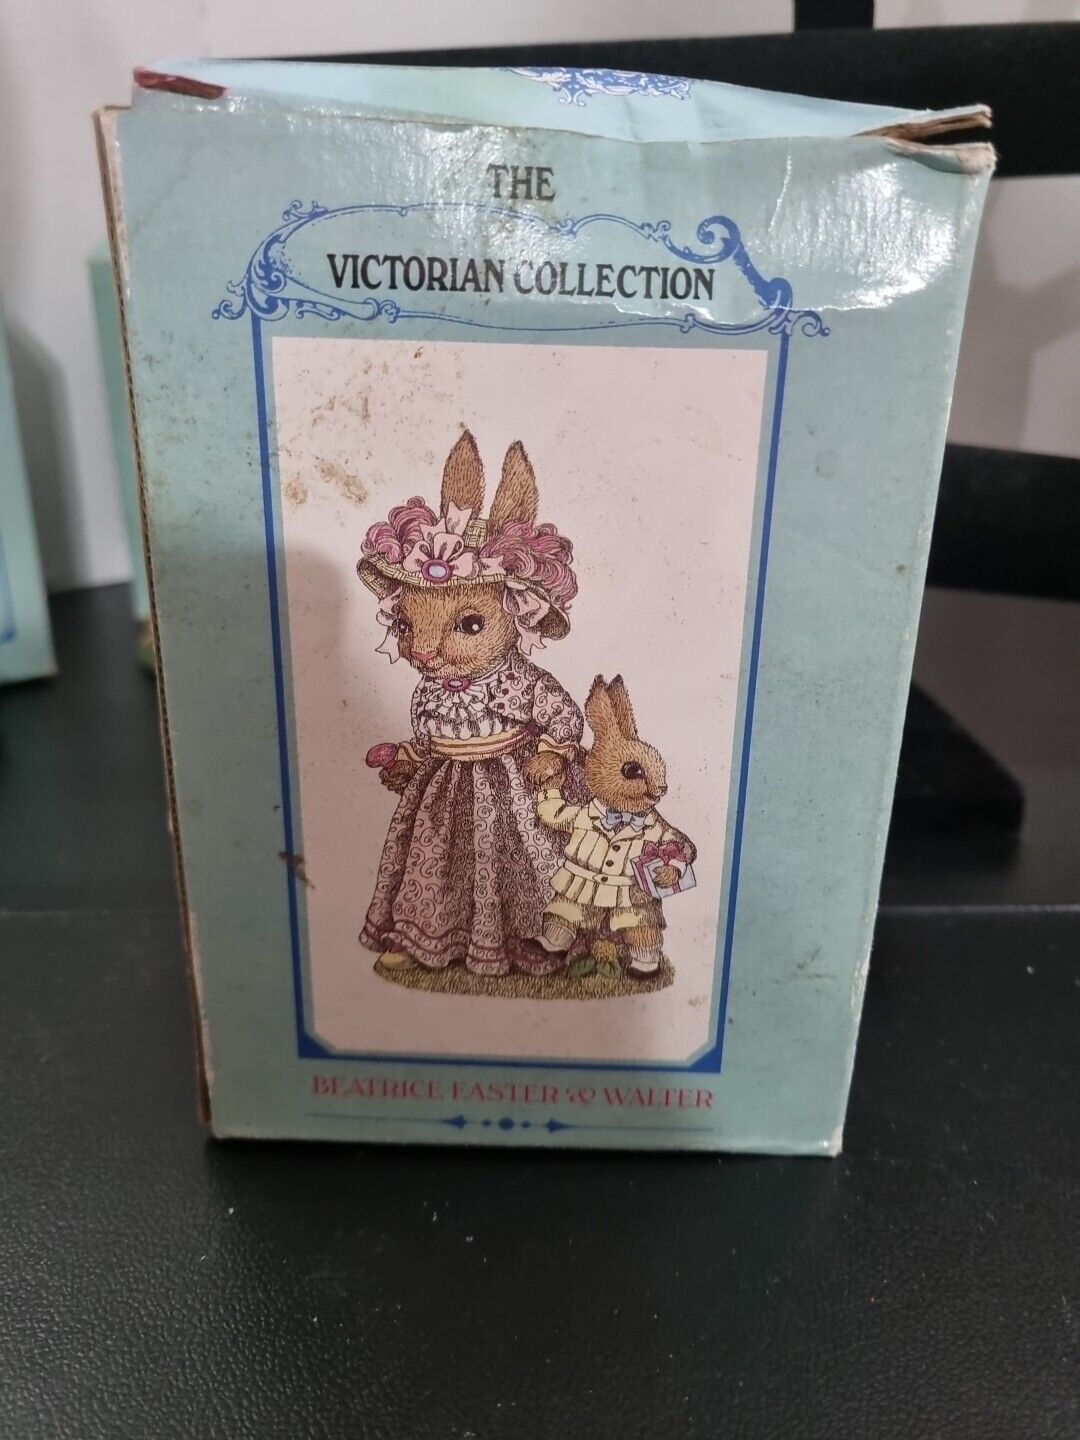 The Victorian Collection Figurine - Beatrice Easter and Walter Bunny 1995, VA37